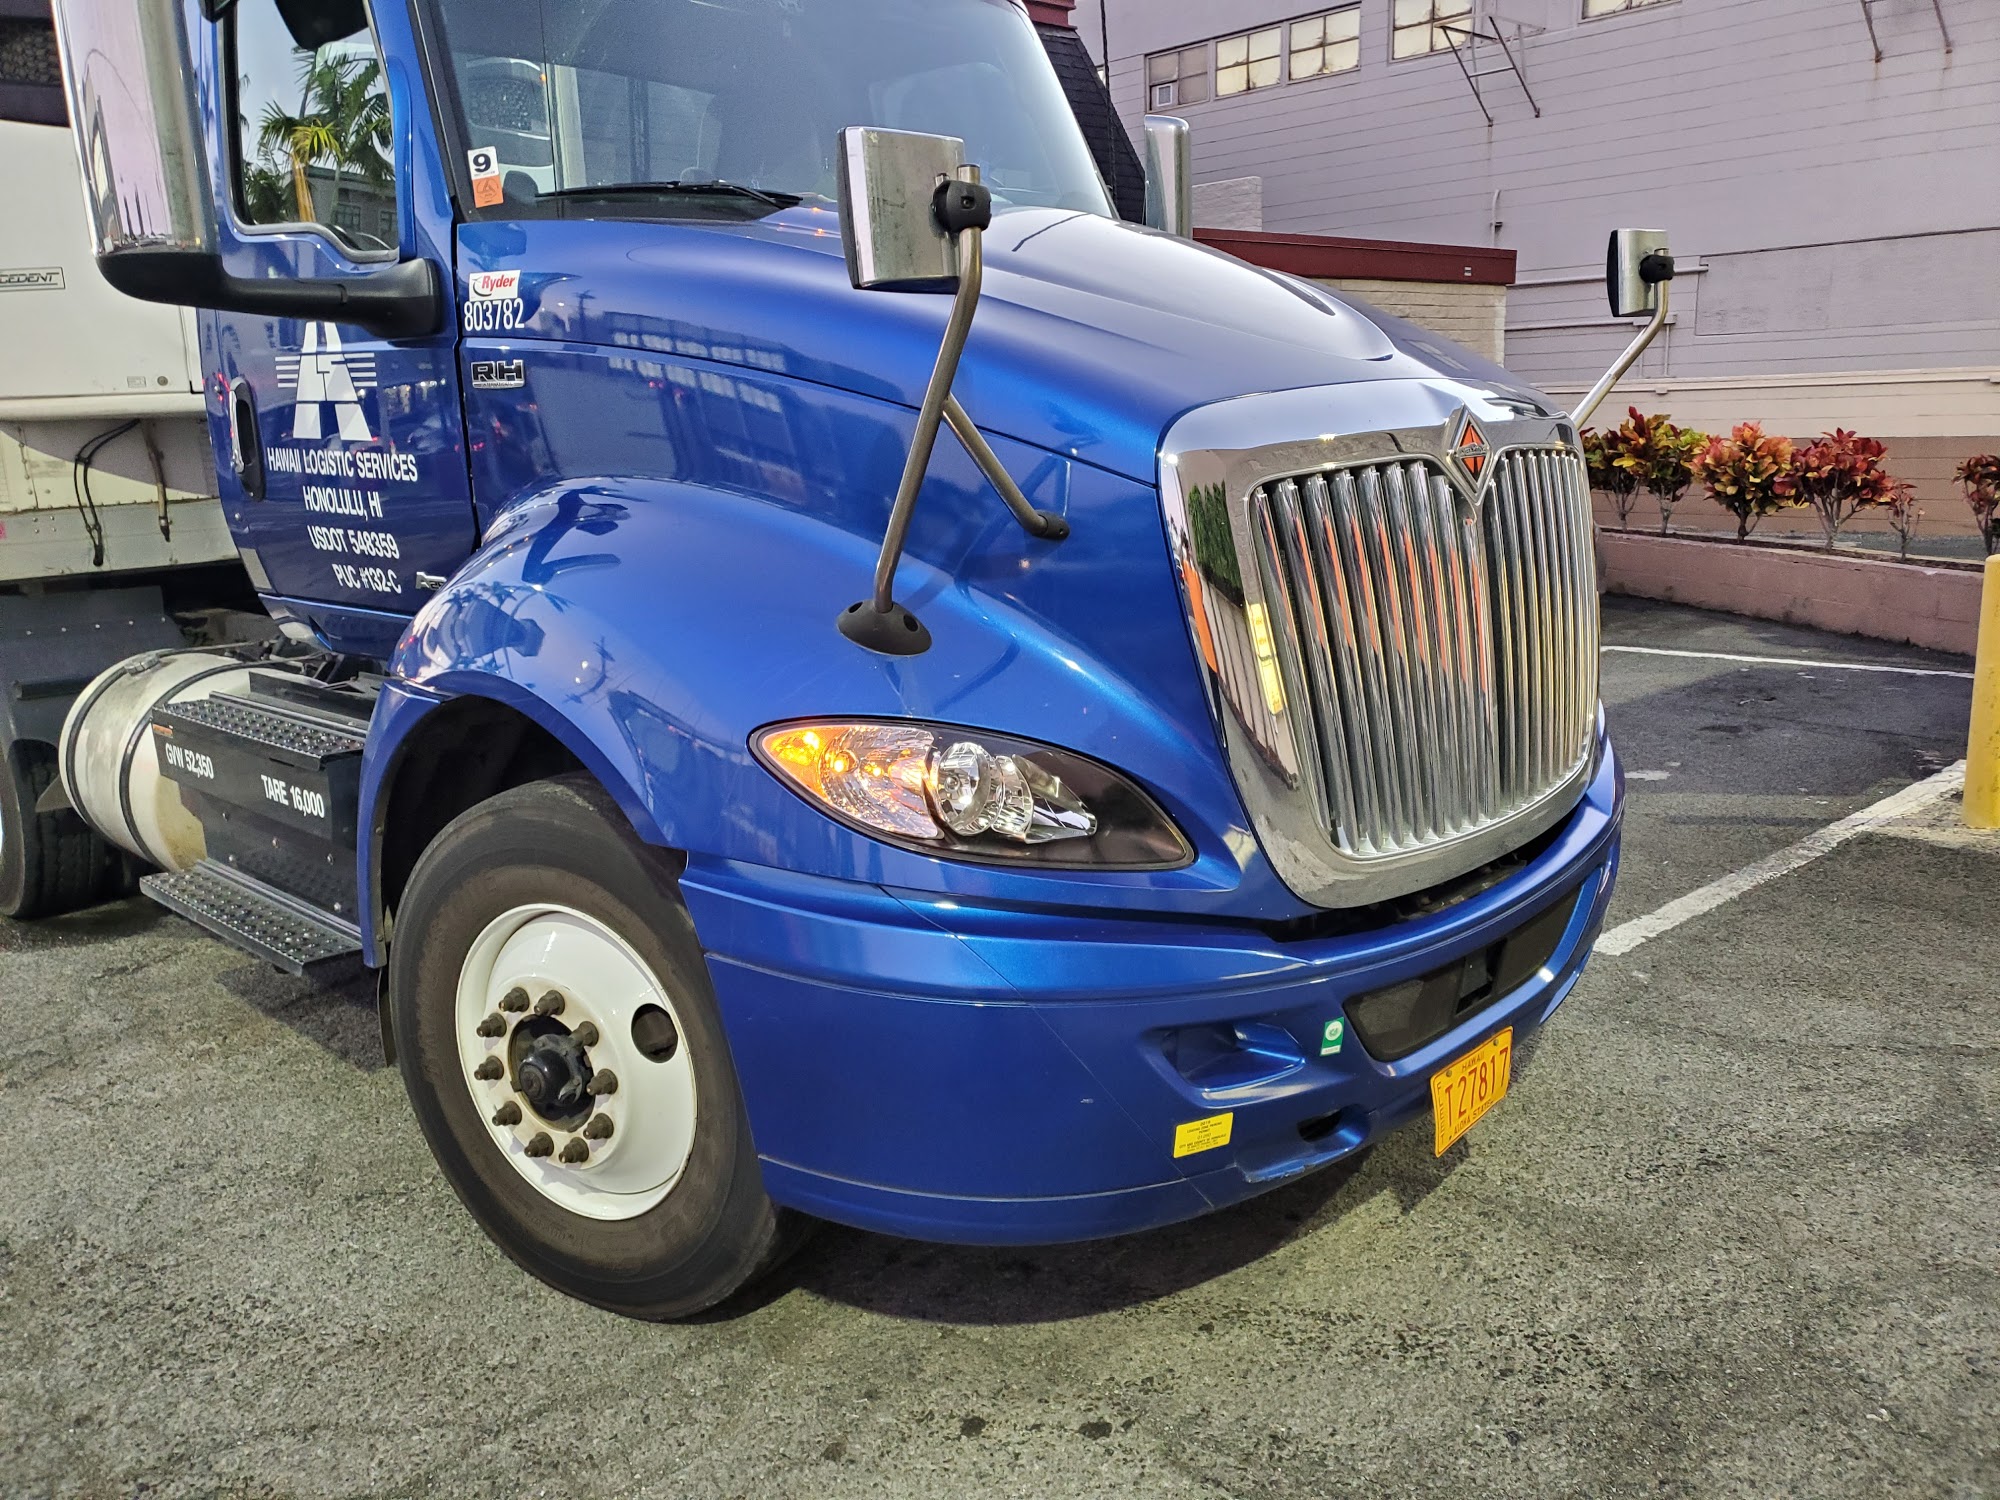 Hawaii Logistic Services